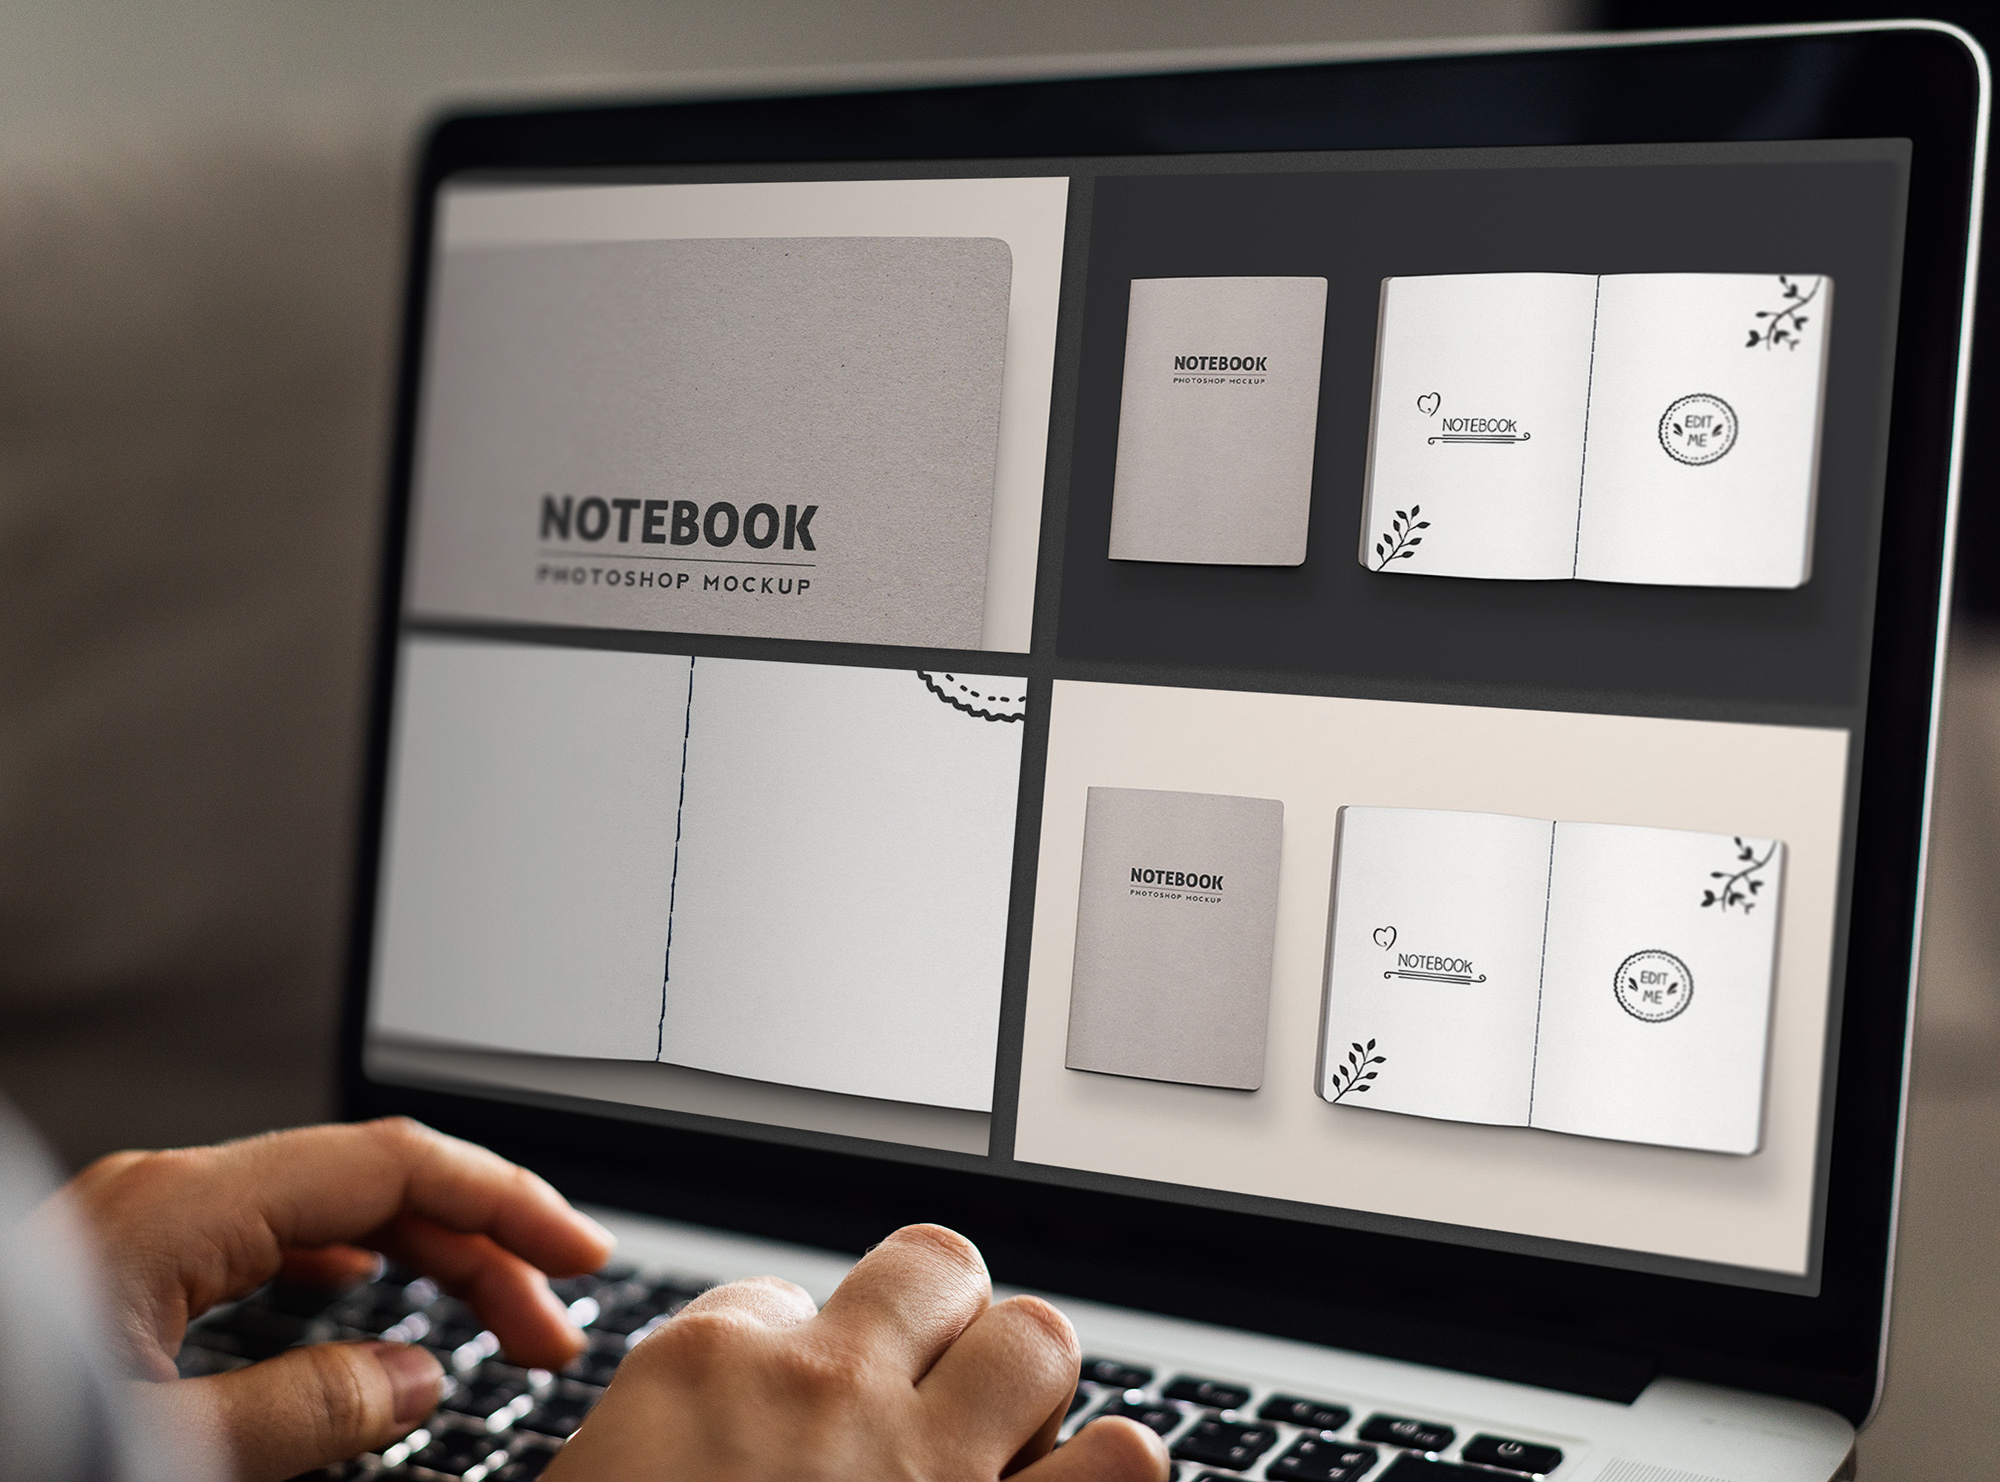 Laptop on screen with images of colorful stitched notebook mockups.